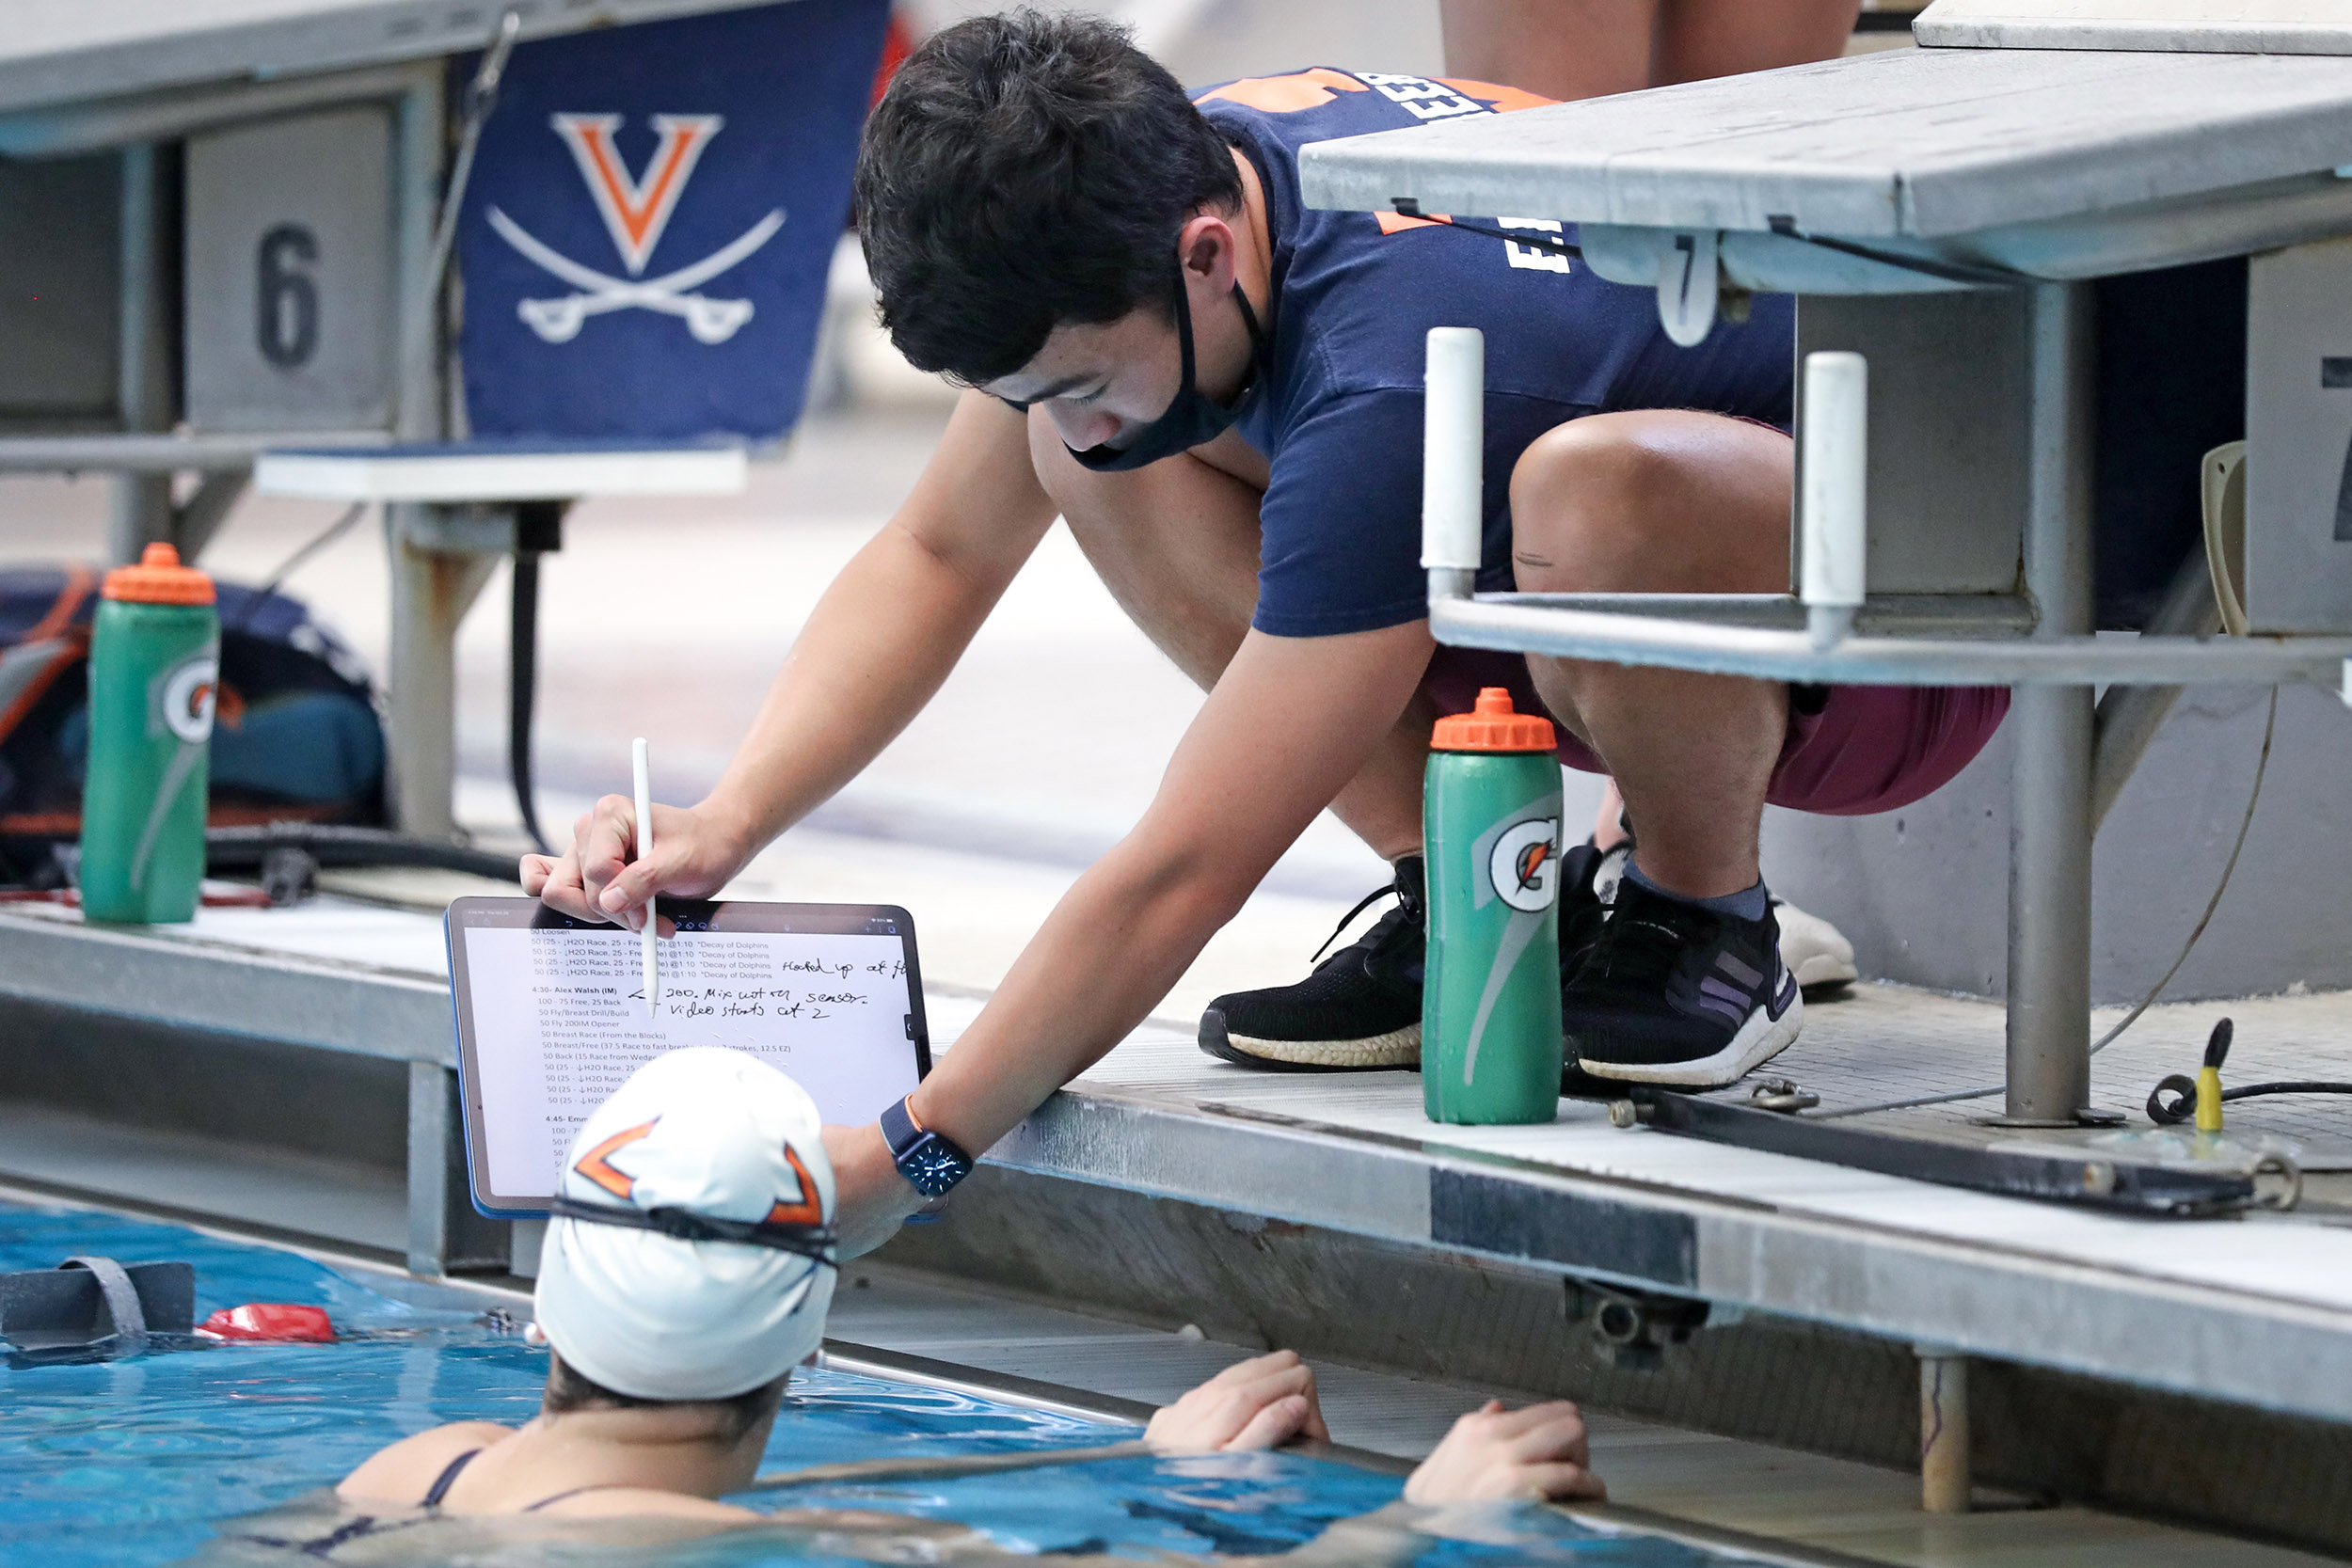 Swimming coach showing UVA swimming information on a clipboard while in the pool